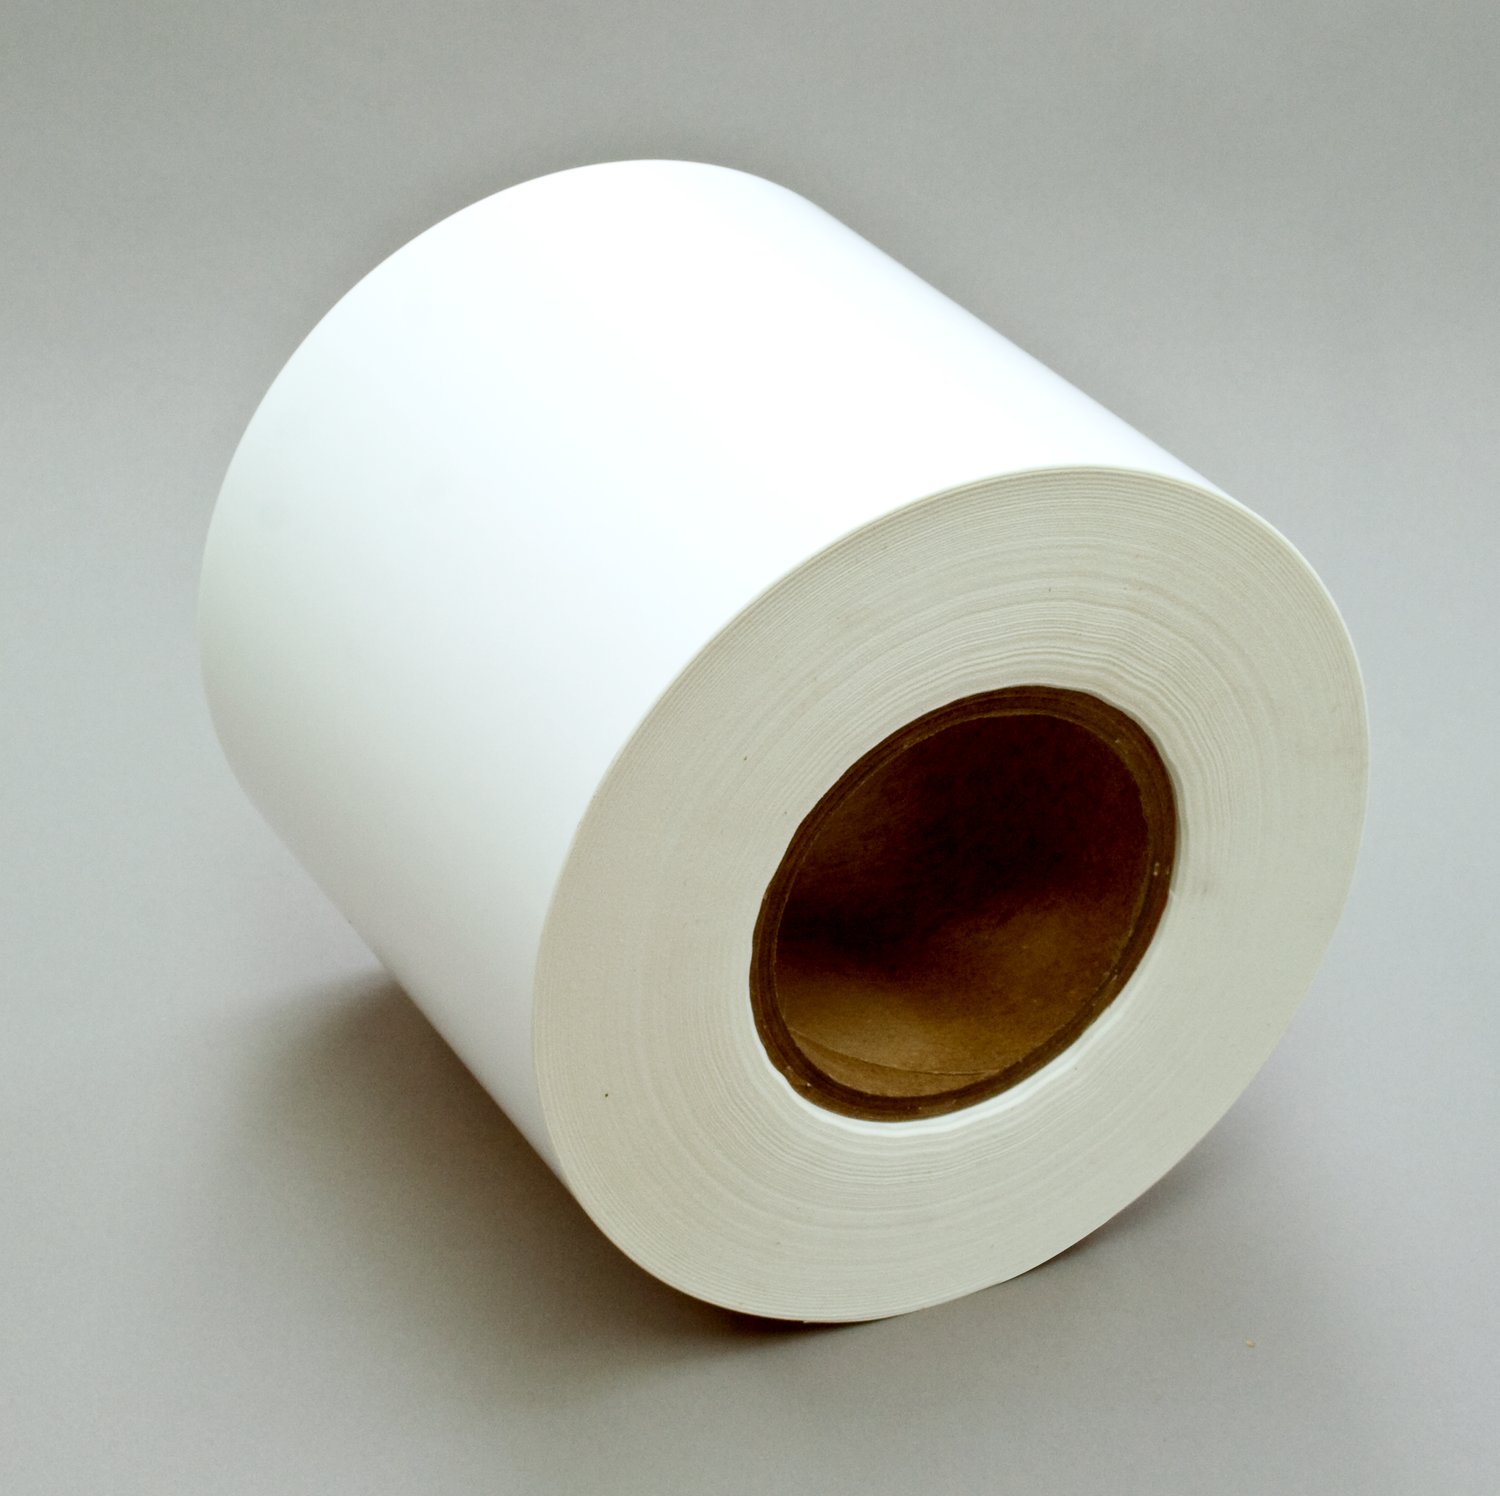 7100073739 - 3M Thermal Transfer Label Material 7810FL, White Polyester Matte, Roll,
Config